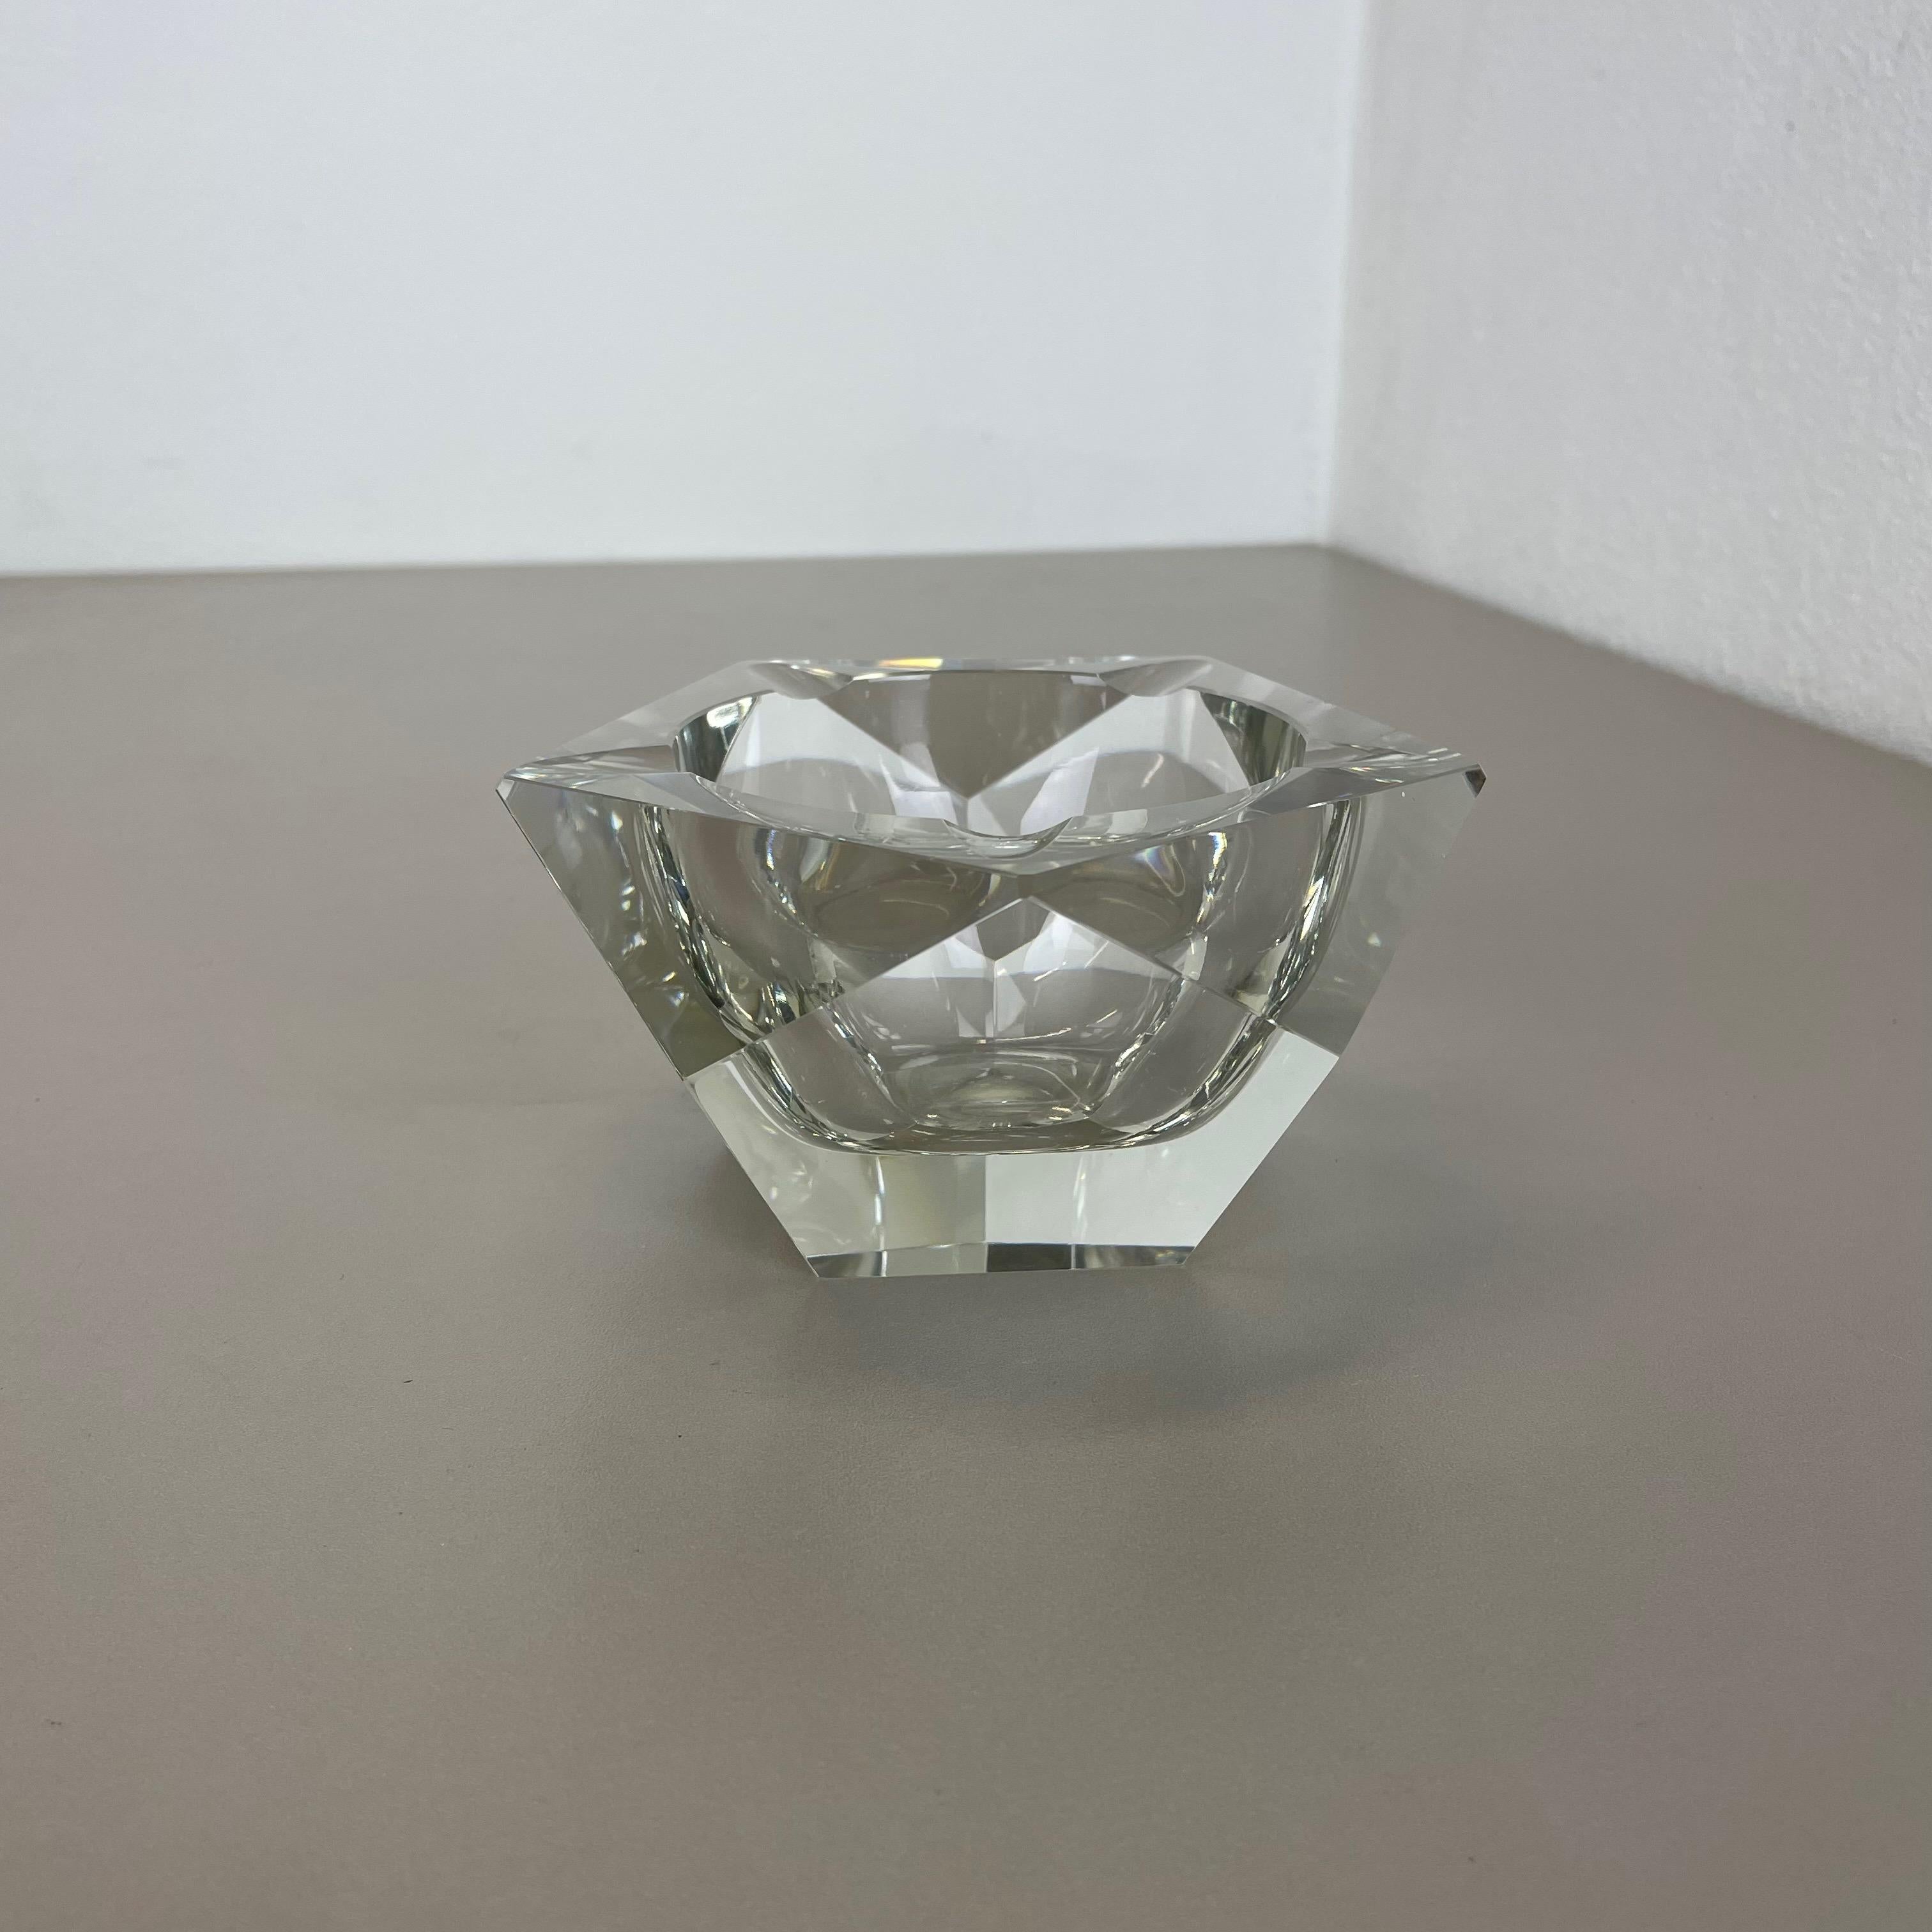 Large Murano Faceted Diamond Lucid Bowl Ashtray Element, Italy, 1970s For Sale 2